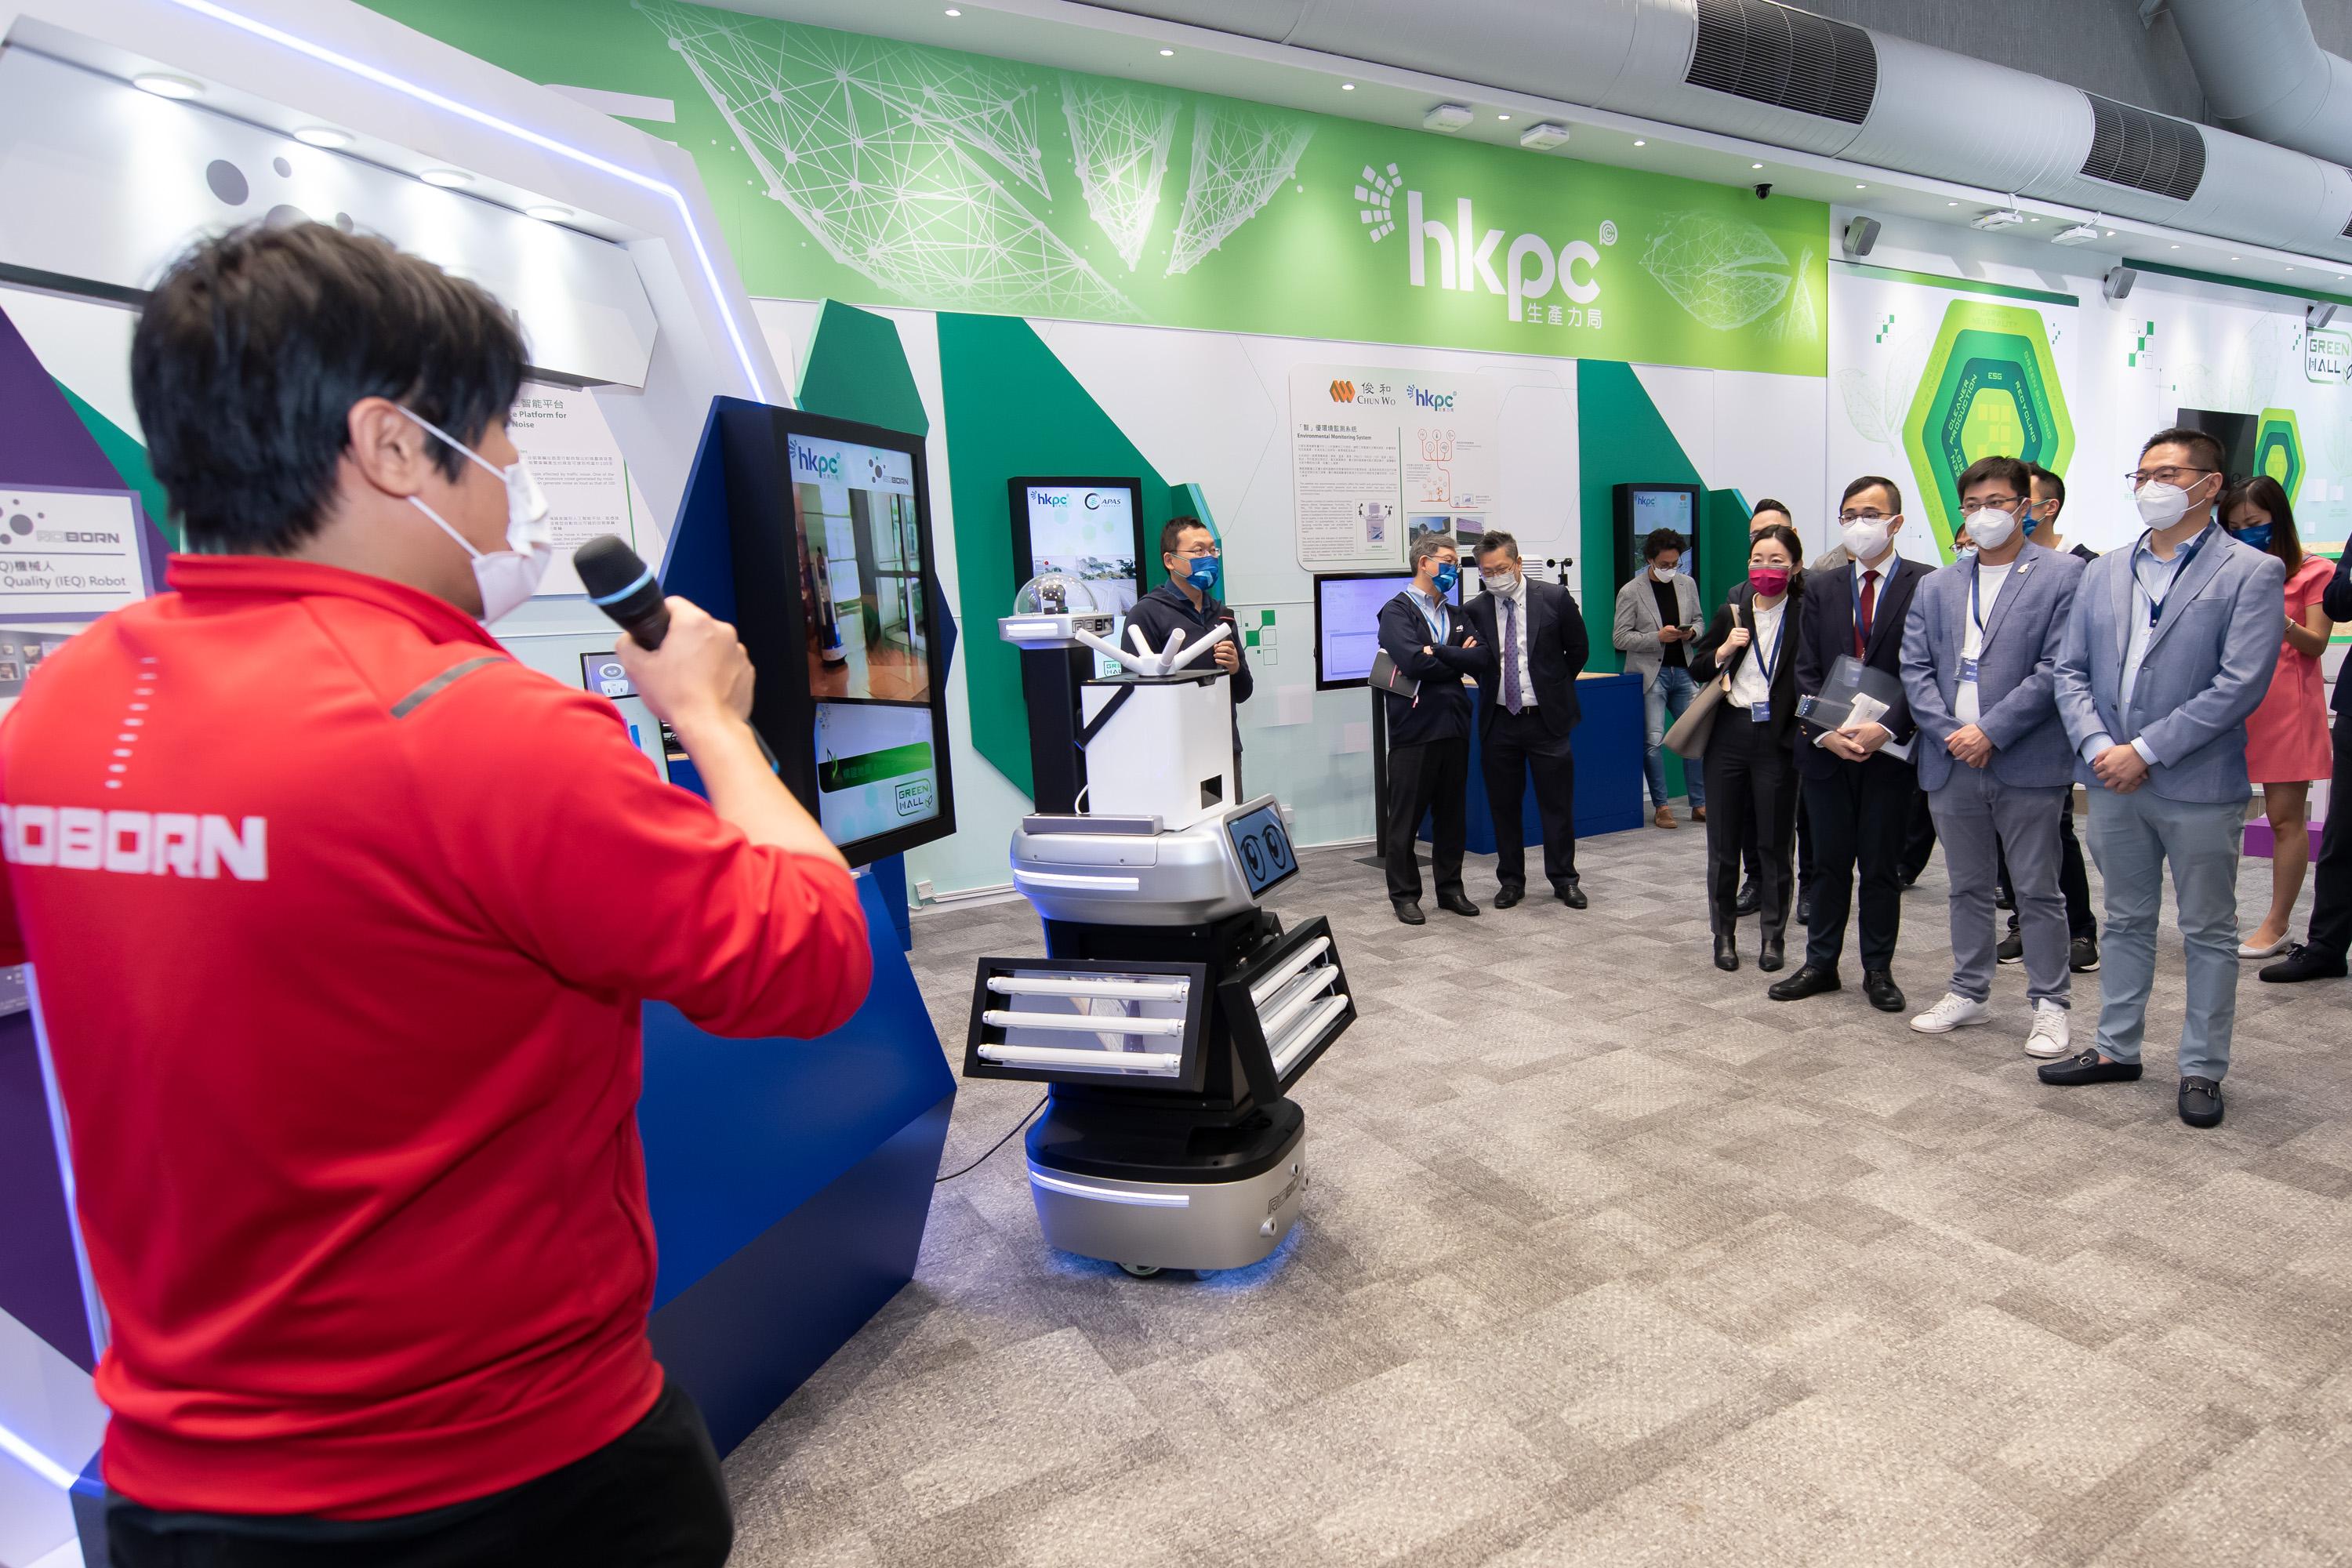 The Legislative Council (LegCo) Panel on Commerce and Industry visited the Hong Kong Productivity Council (HKPC) today (June 20).  Photo shows LegCo Members observing a demonstration of green technologies and innovative solutions in the Green Hall of HKPC.